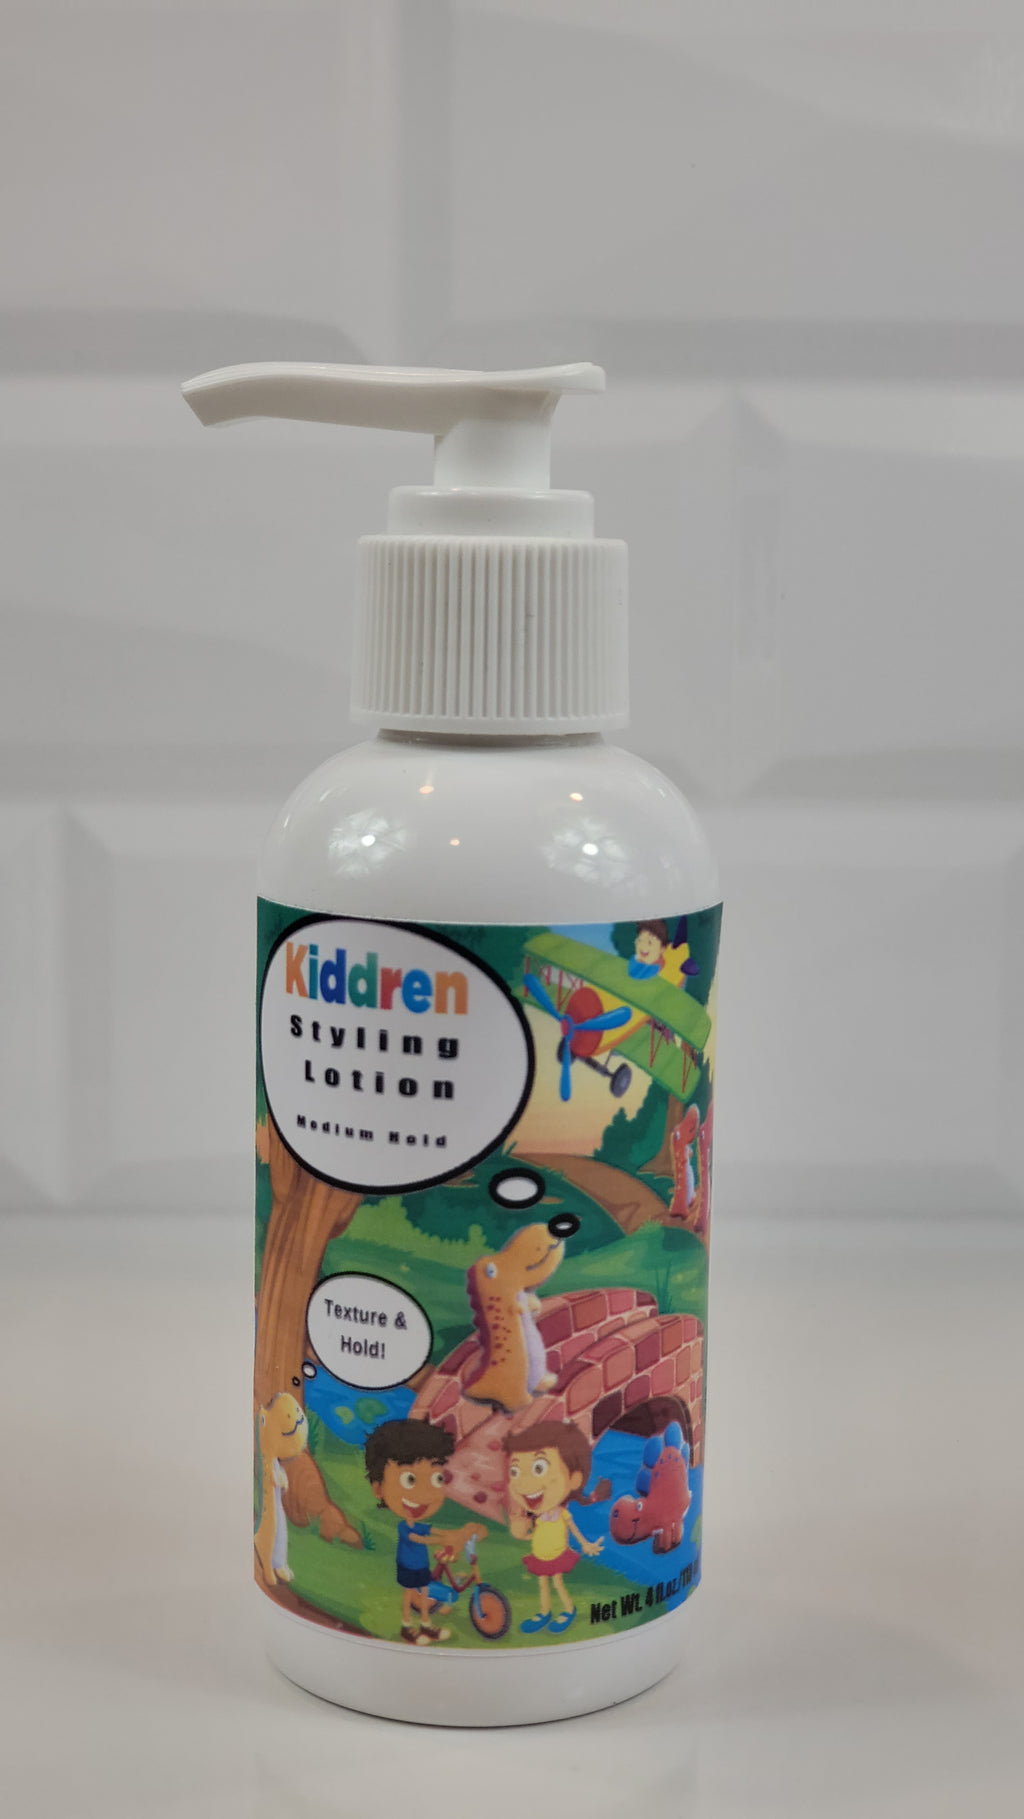 Kiddren Styling Lotion 4 ounce hair styling lotion for kids provides light to medium hold and alternative hair styles